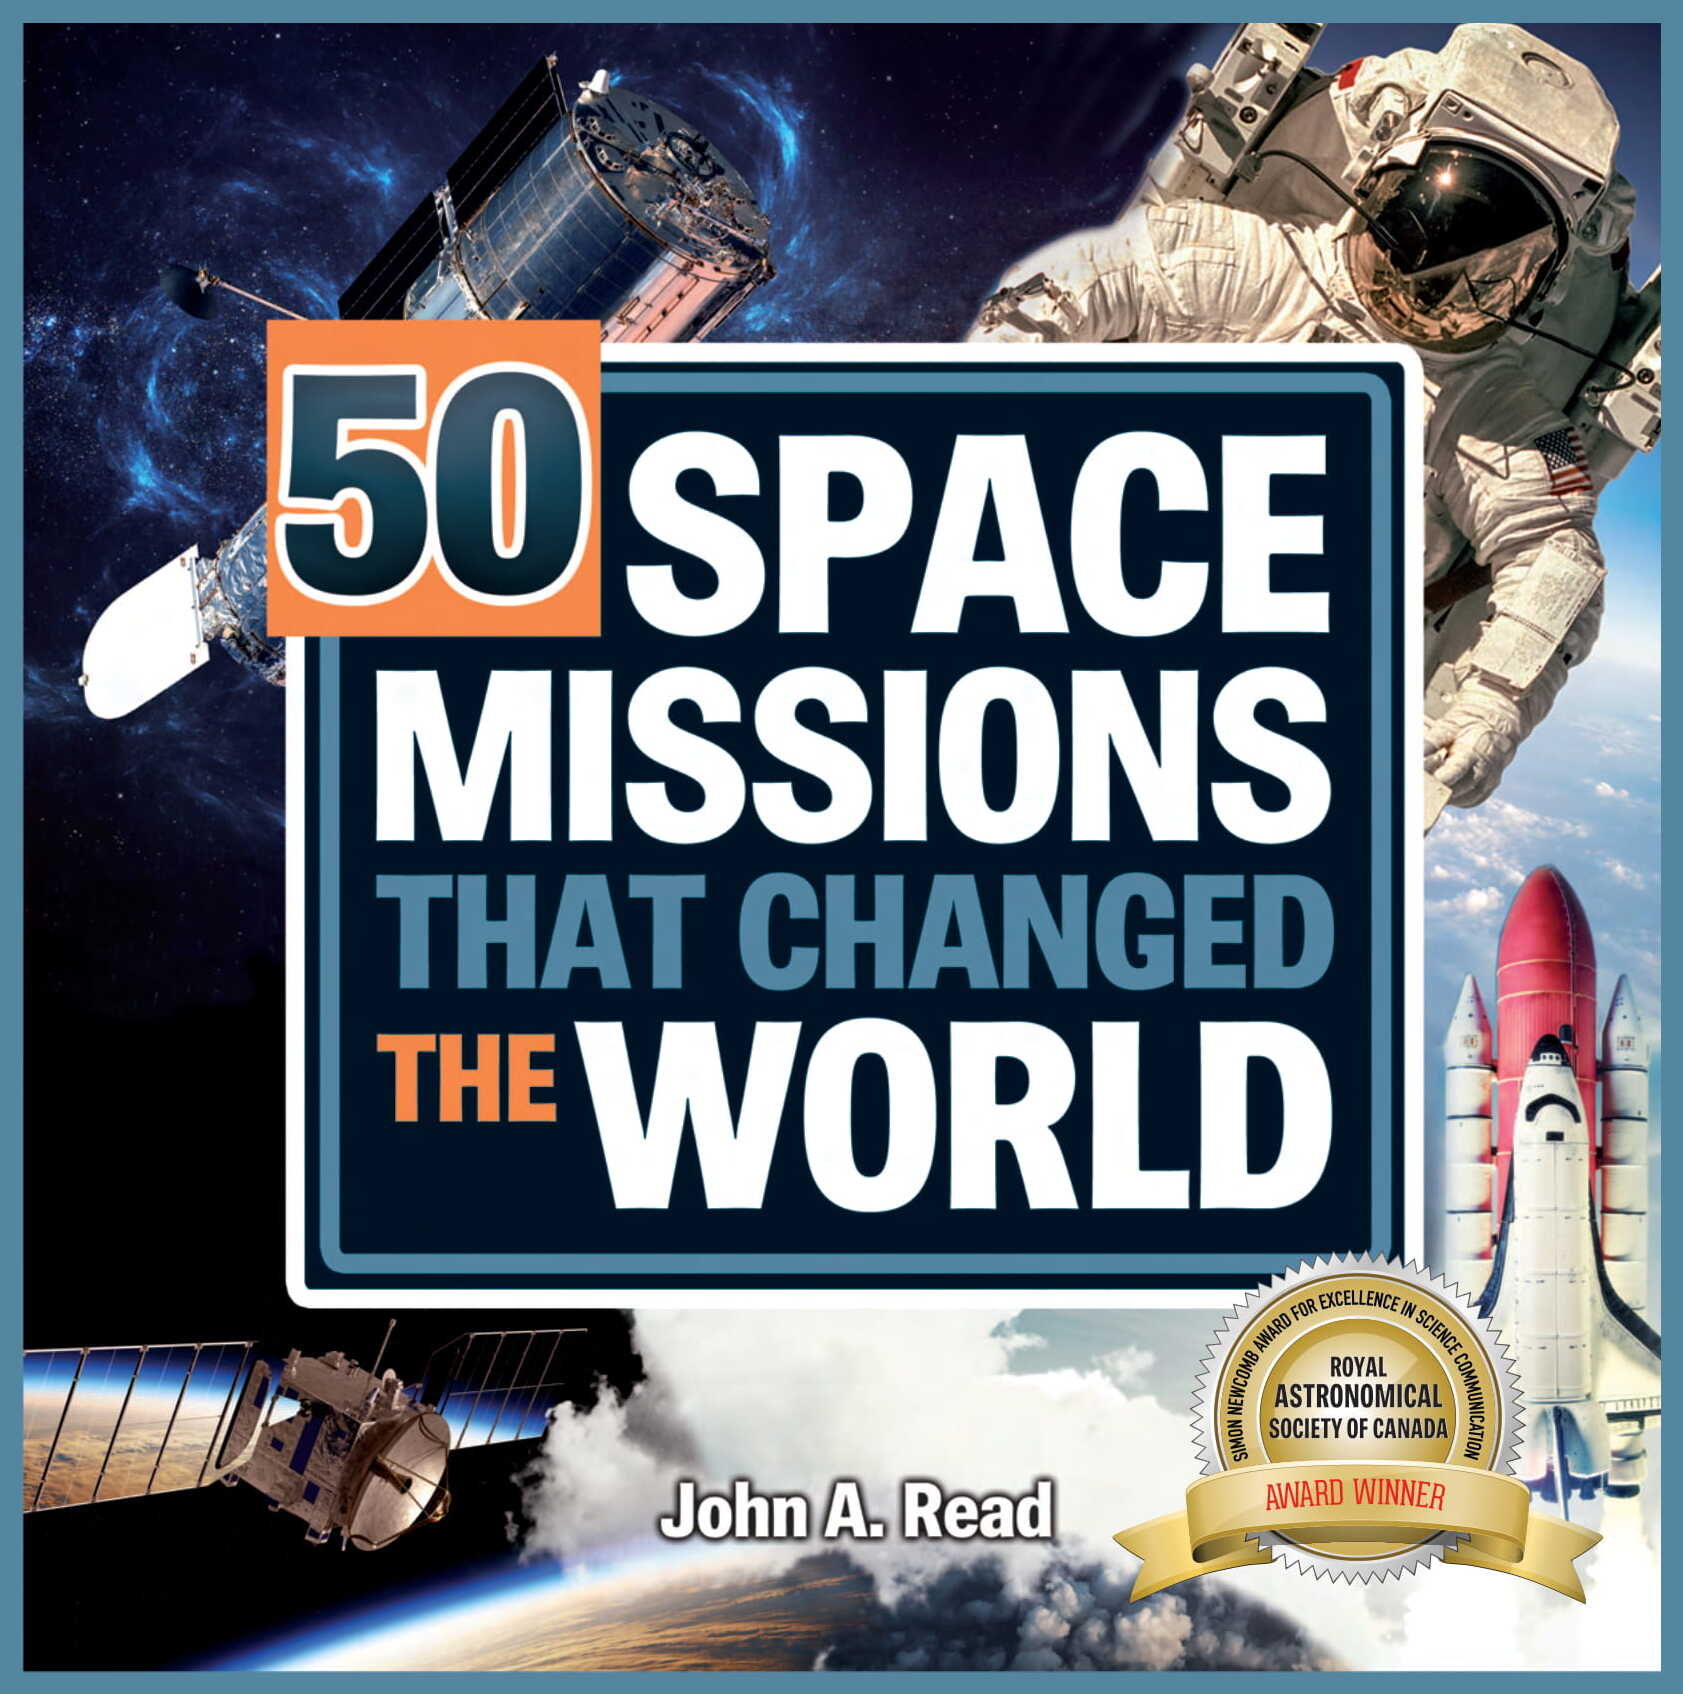 50 Space Missions that Changed the World